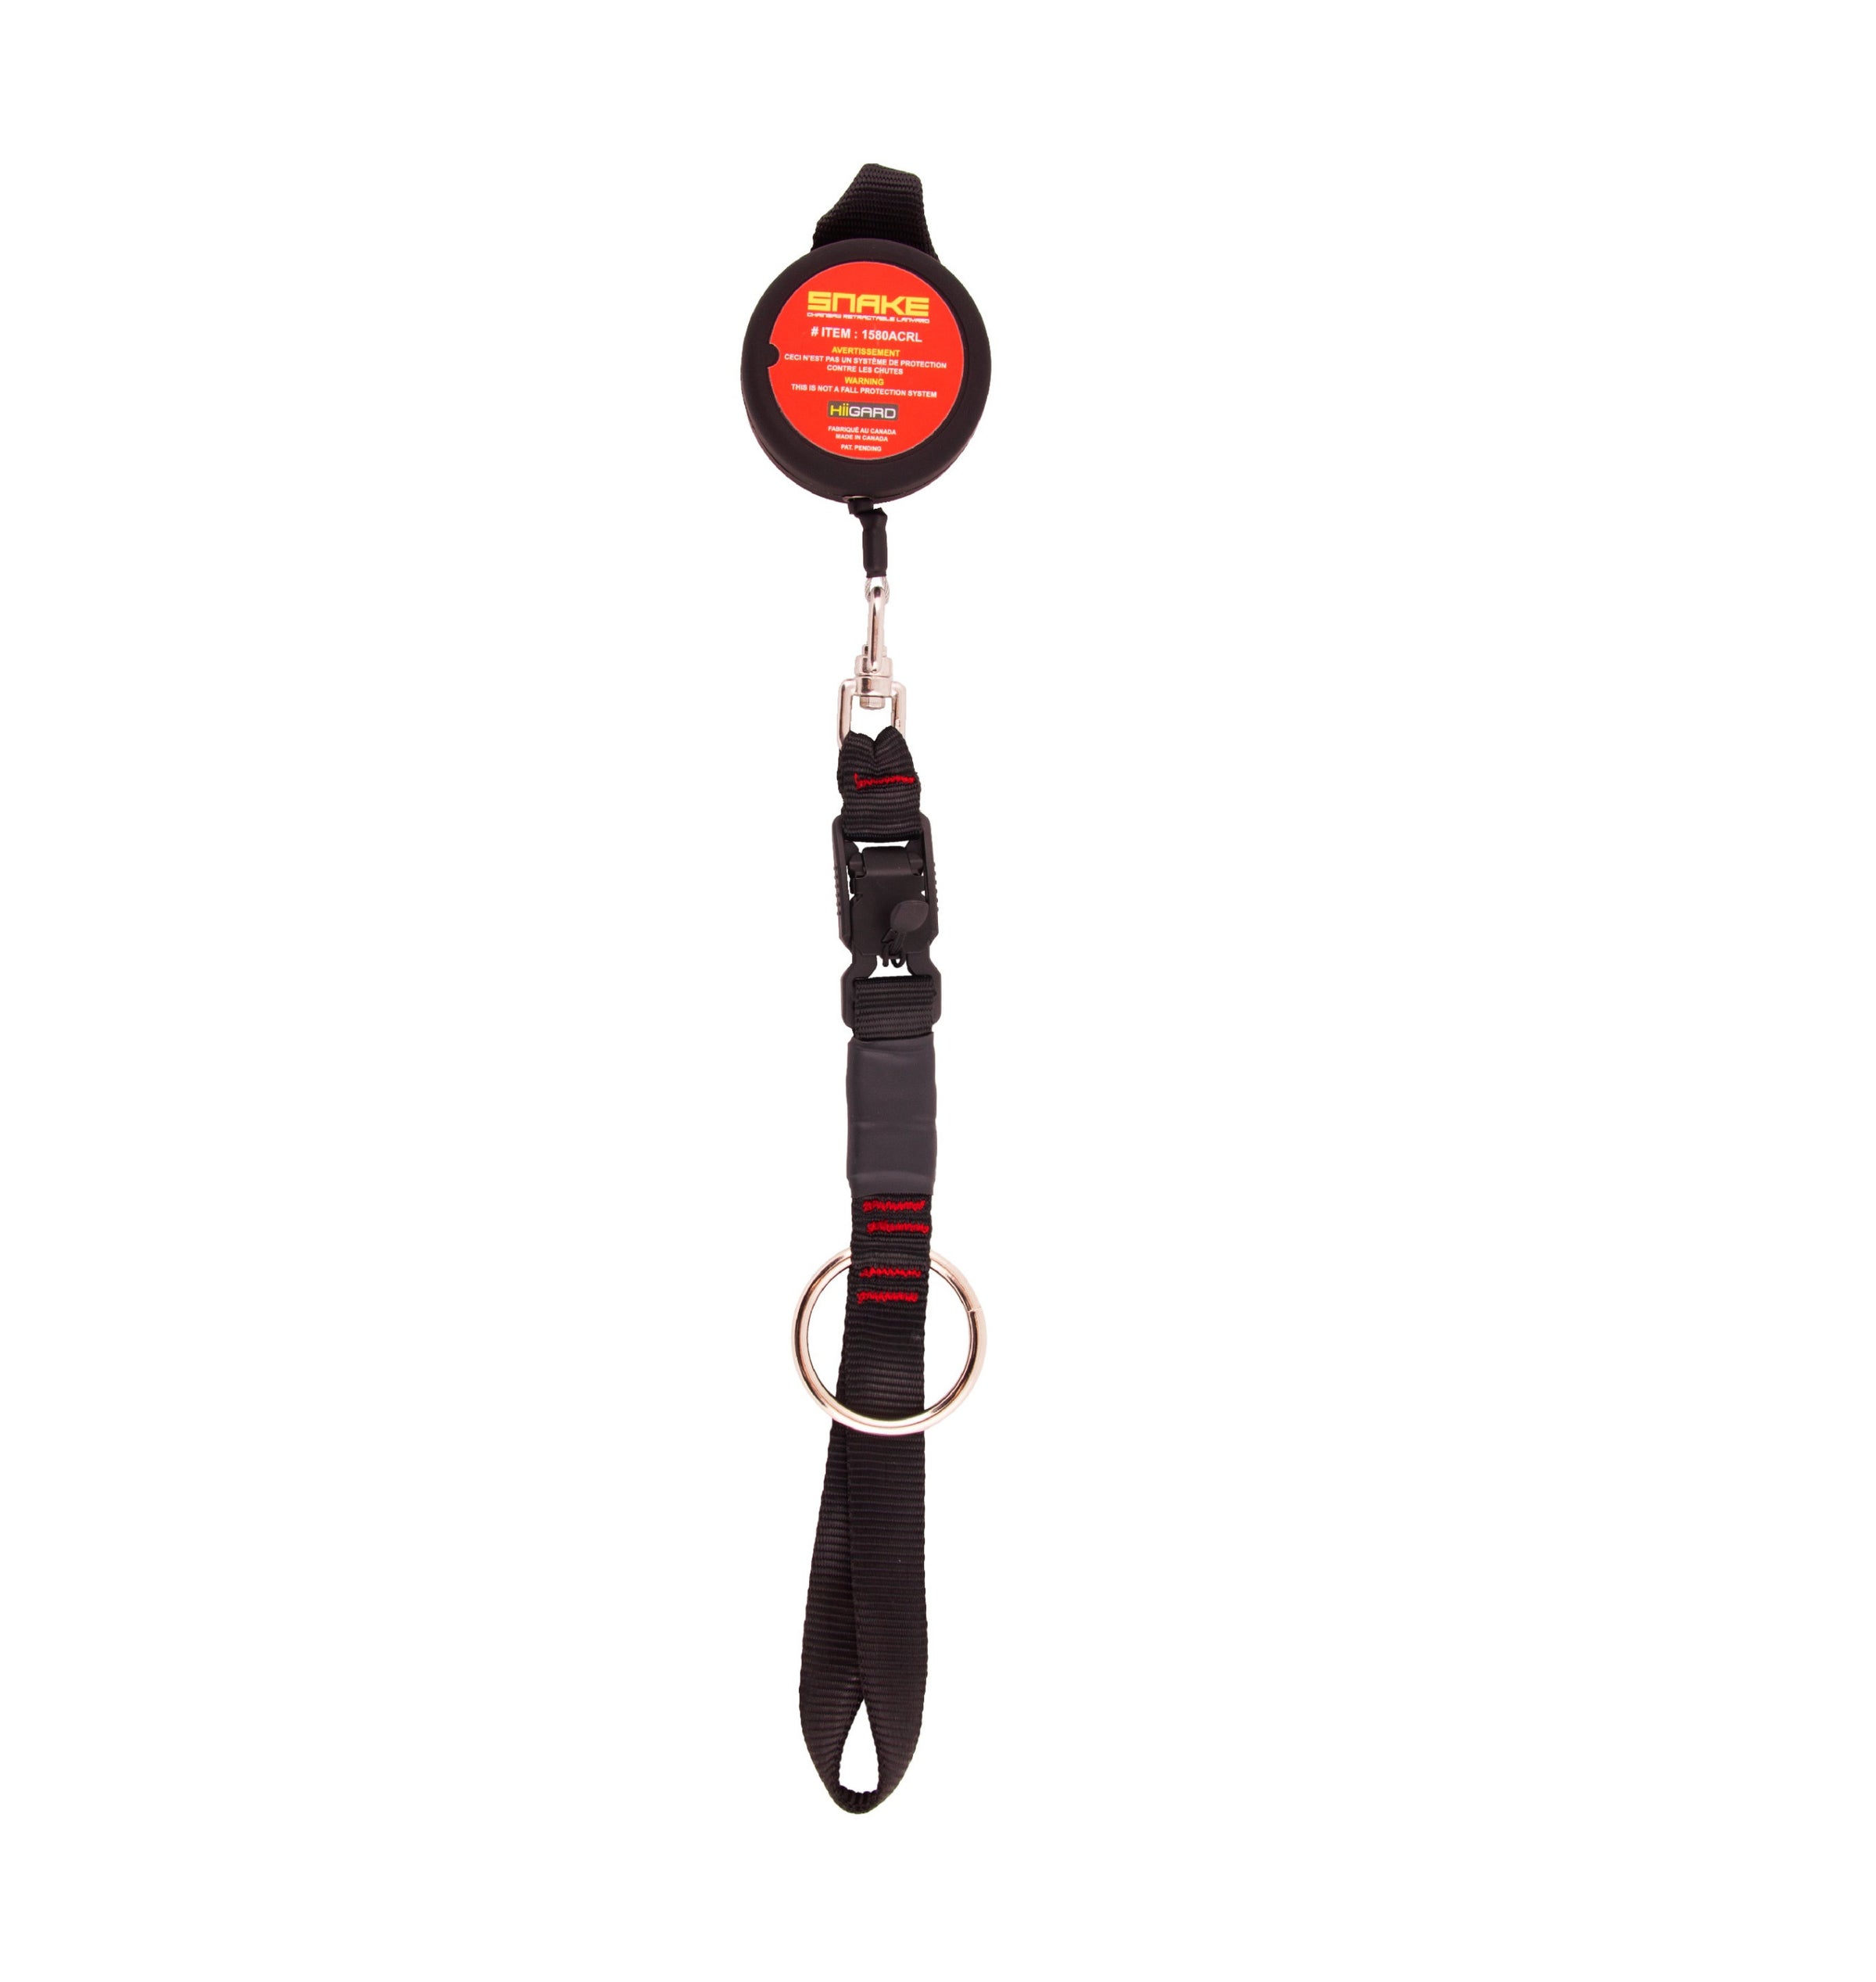 RETRACTABLE CHAINSAW LANYARD